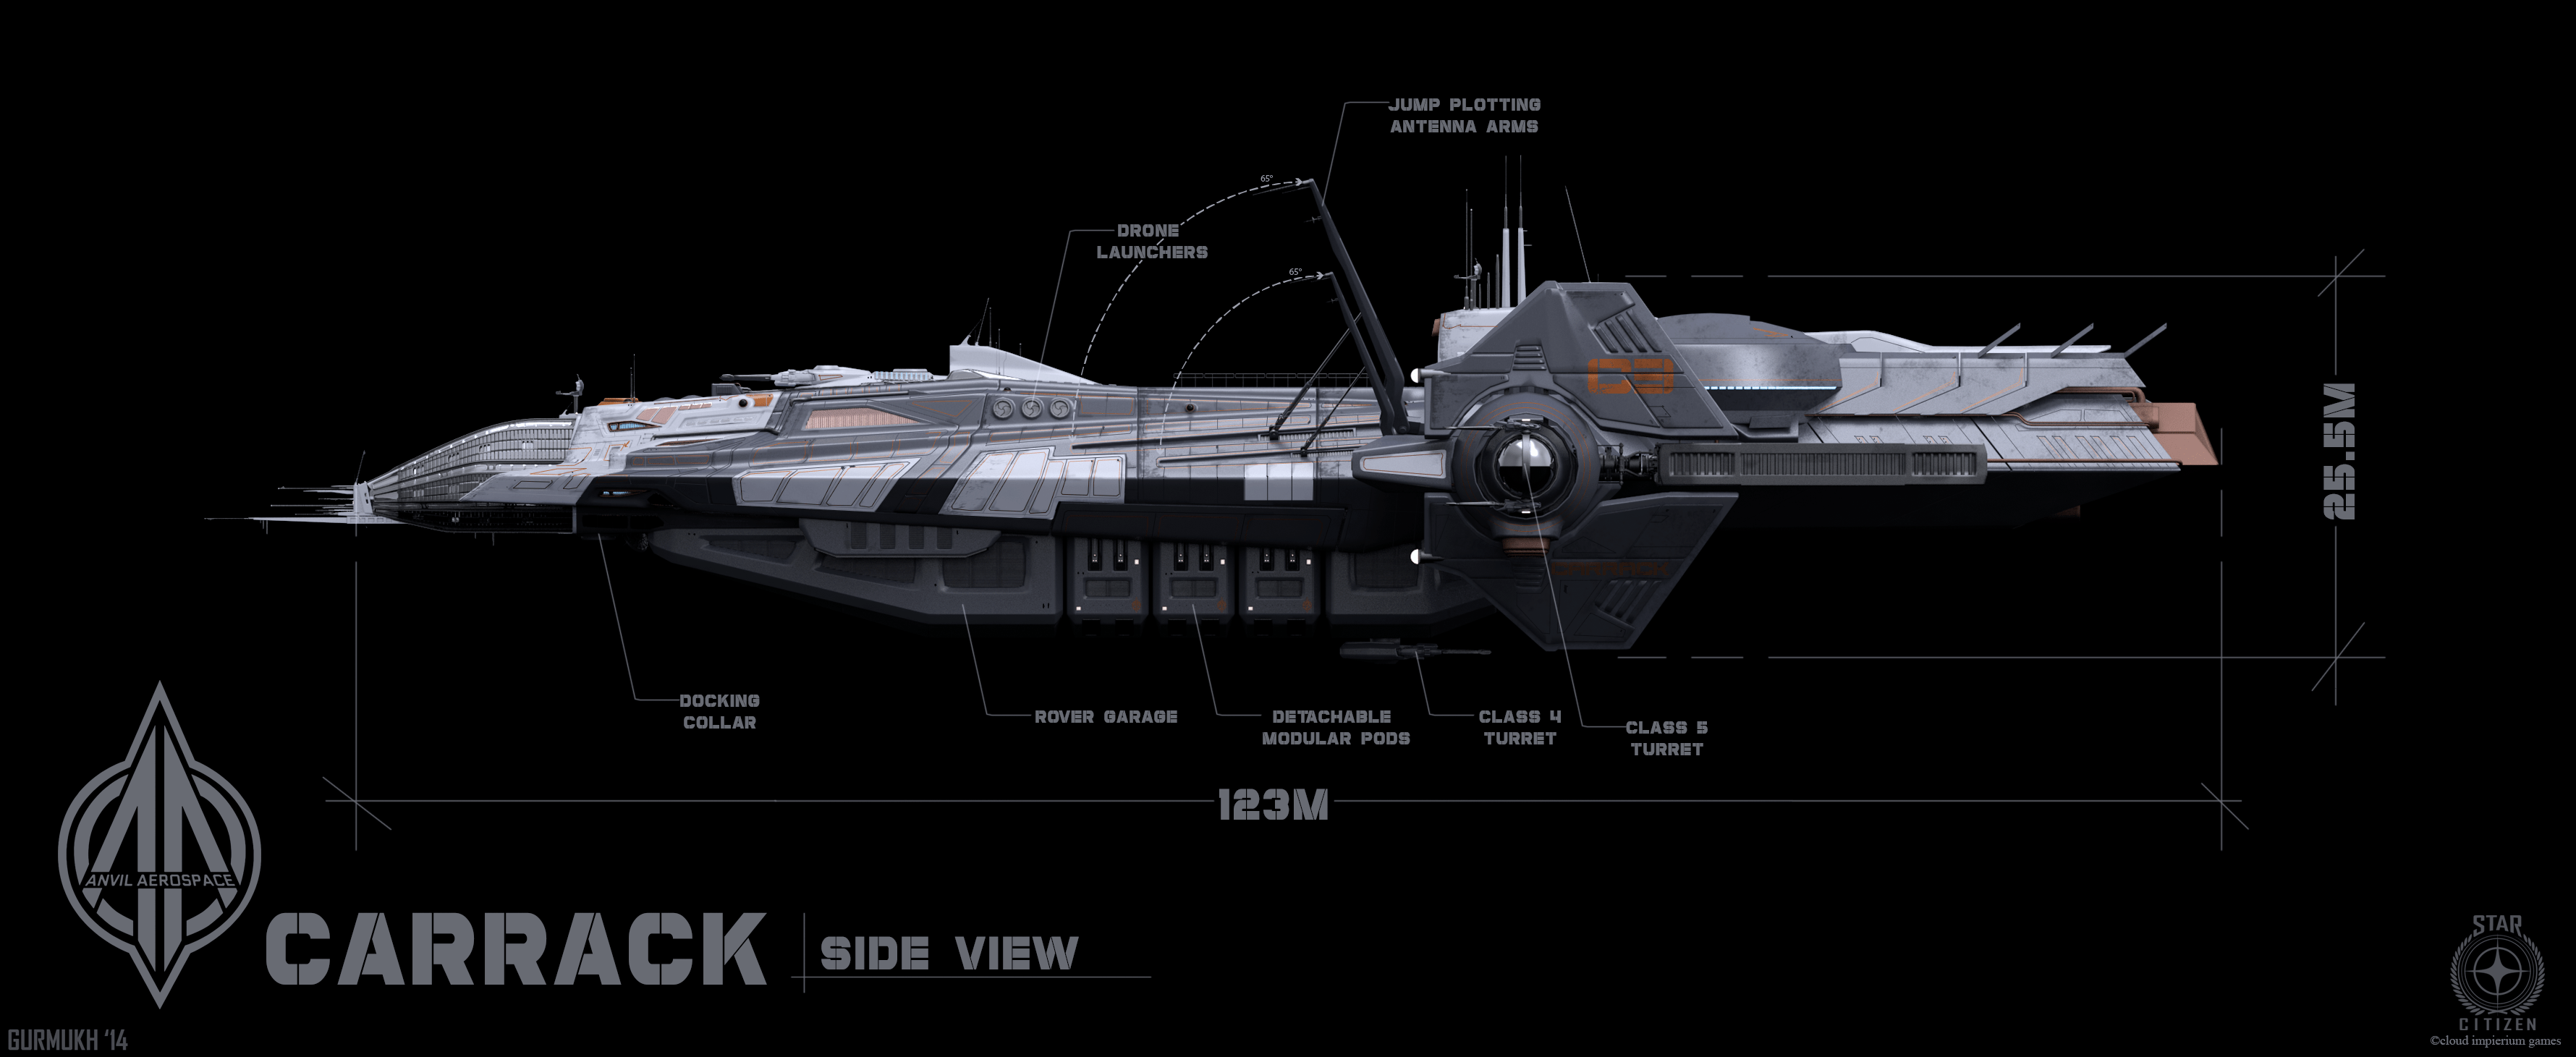 I Want To Live In This Cool Spaceship From Star Citizen